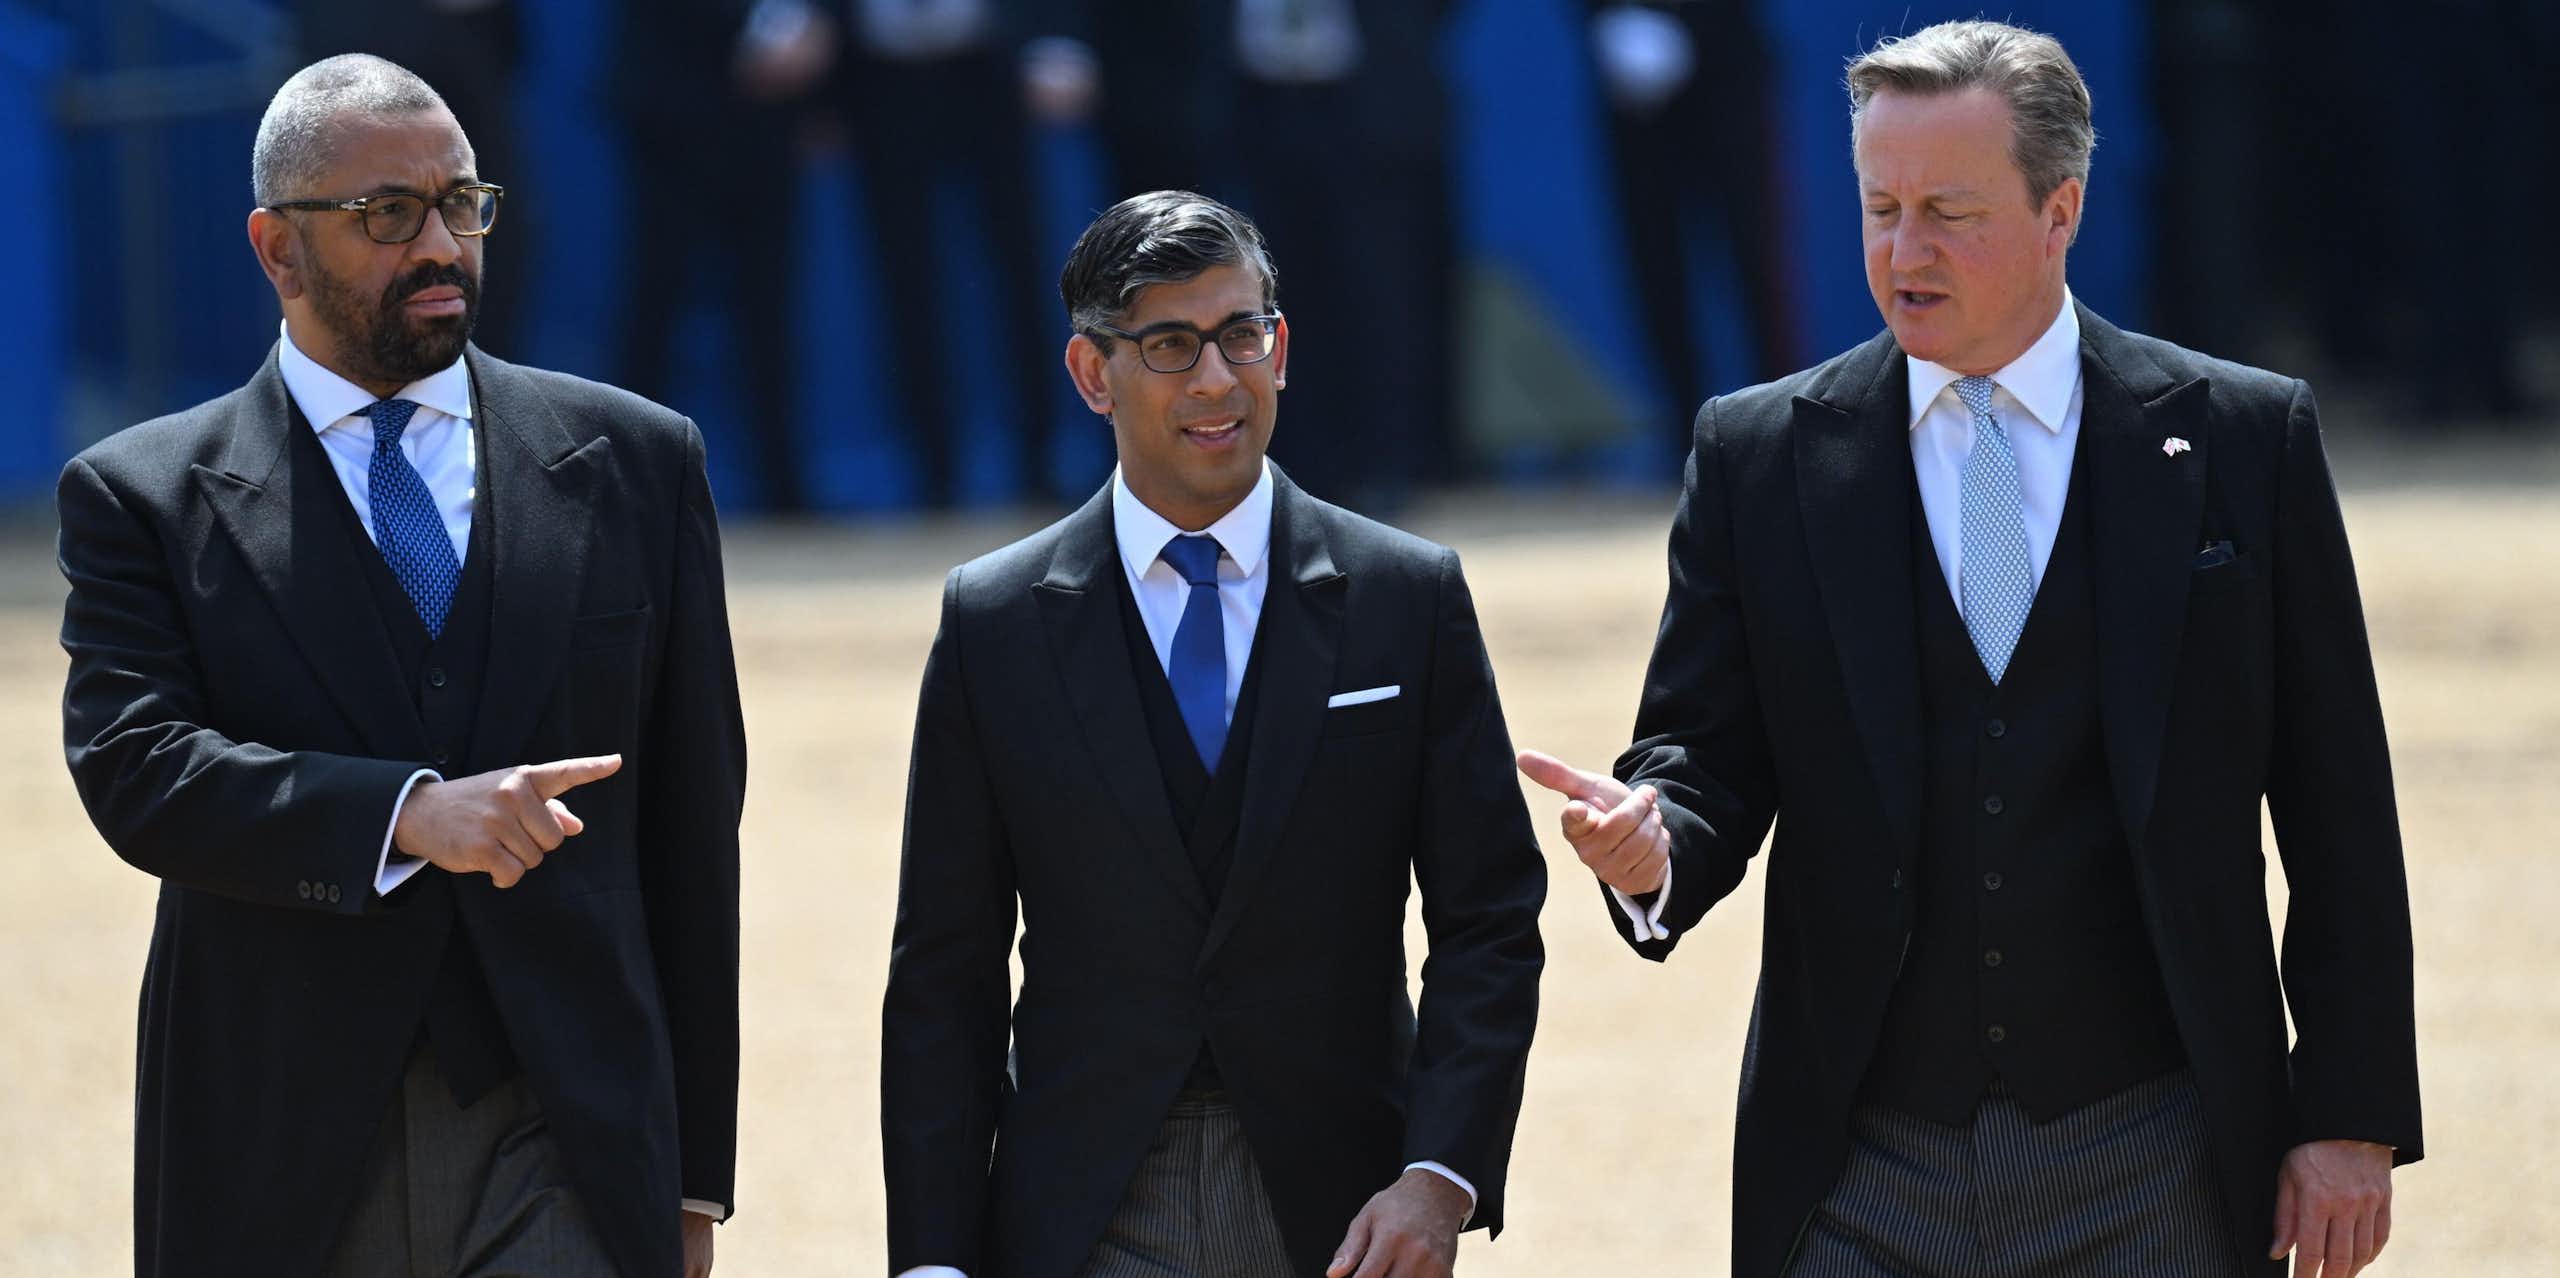 James Cleverly, Rishi Sunak and David Cameron walking together, with Cleverly pointing in one direction and Cameron the other, both towards Sunak.